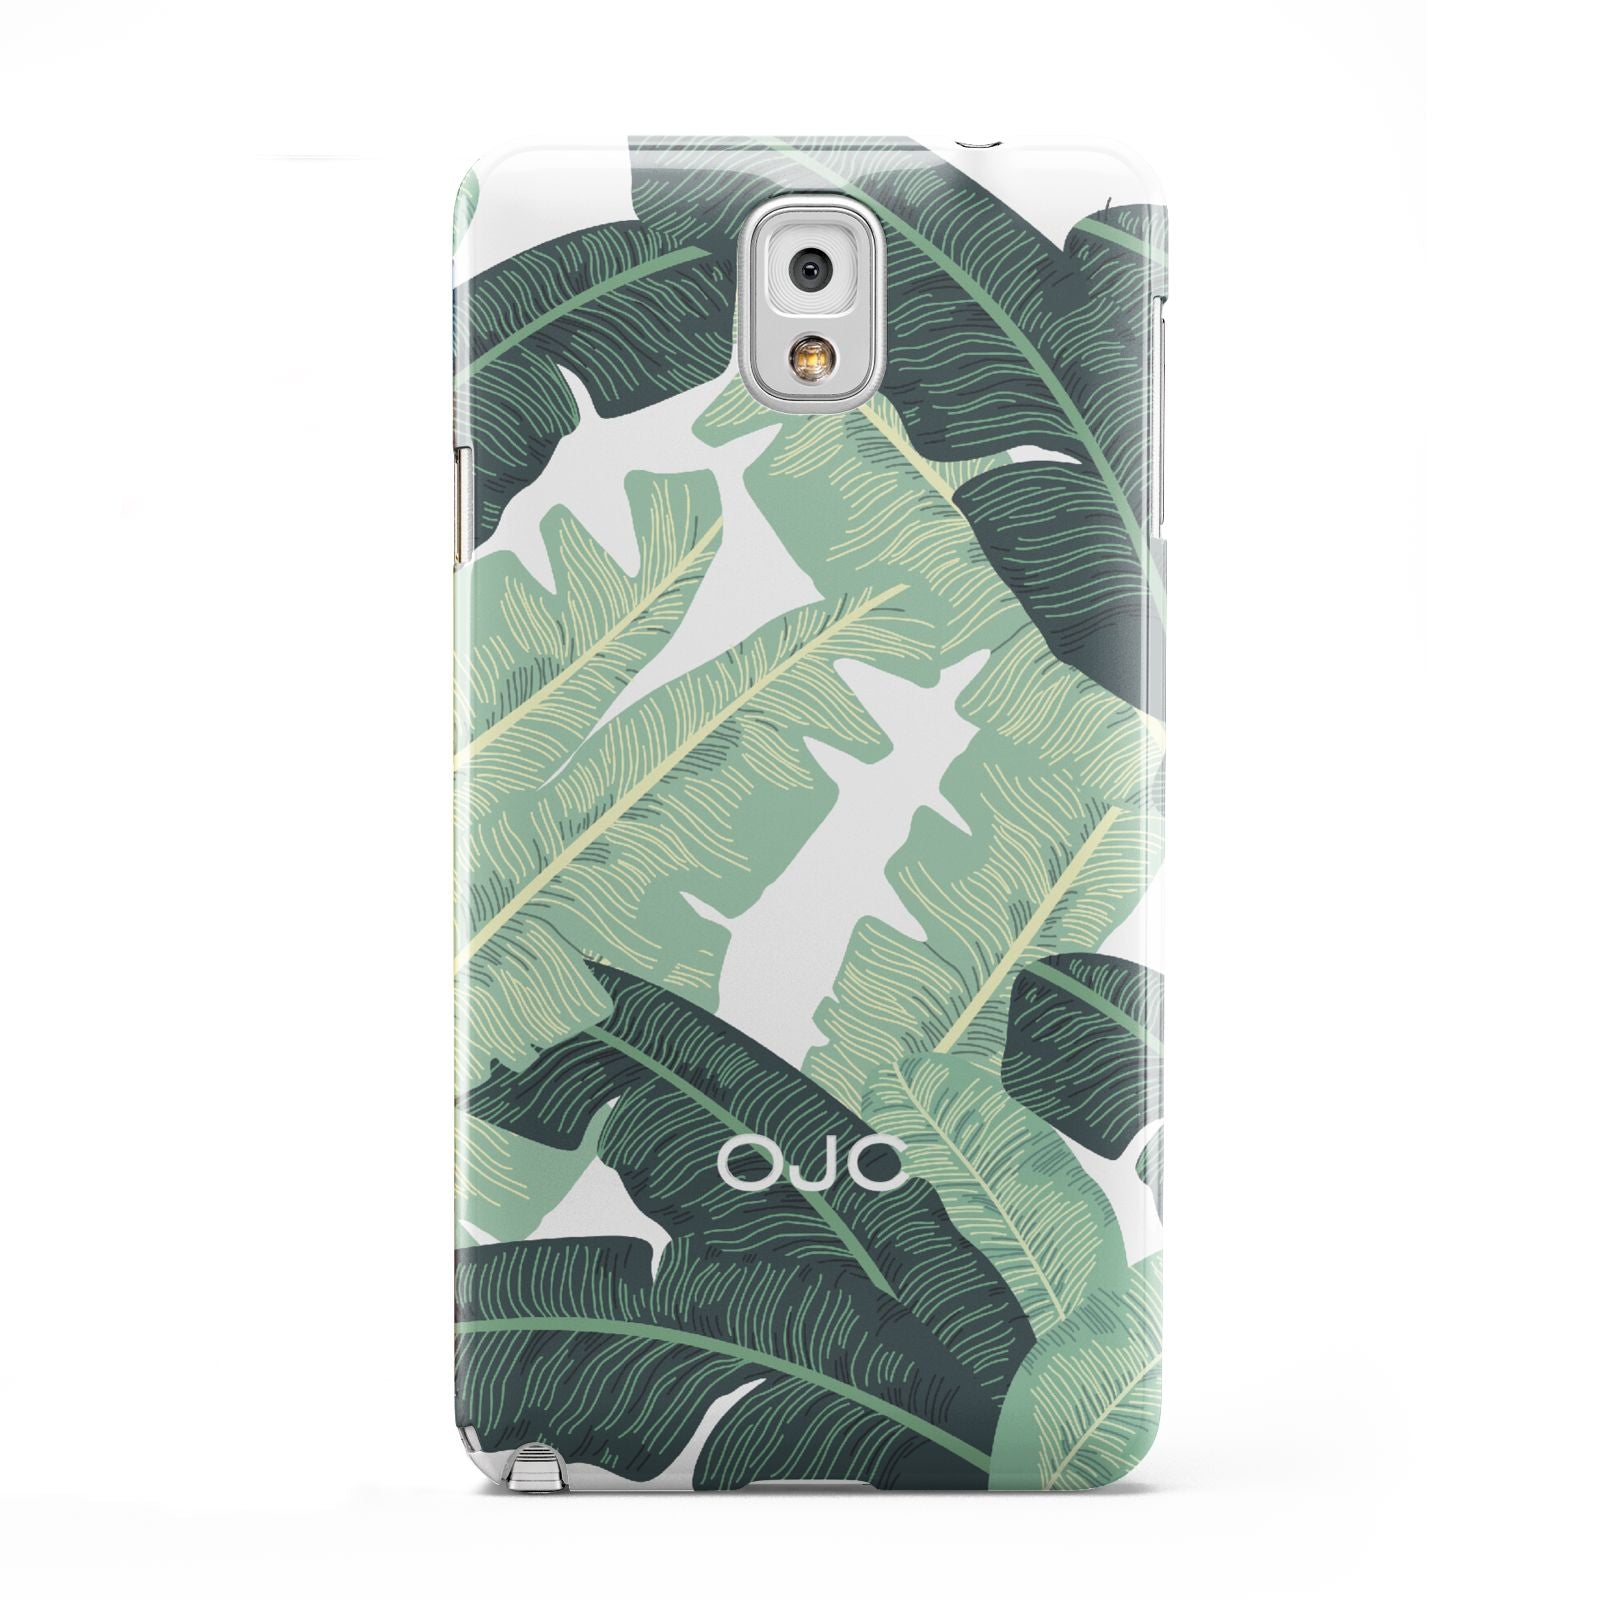 Personalised Palm Banana Leaf Samsung Galaxy Note 3 Case